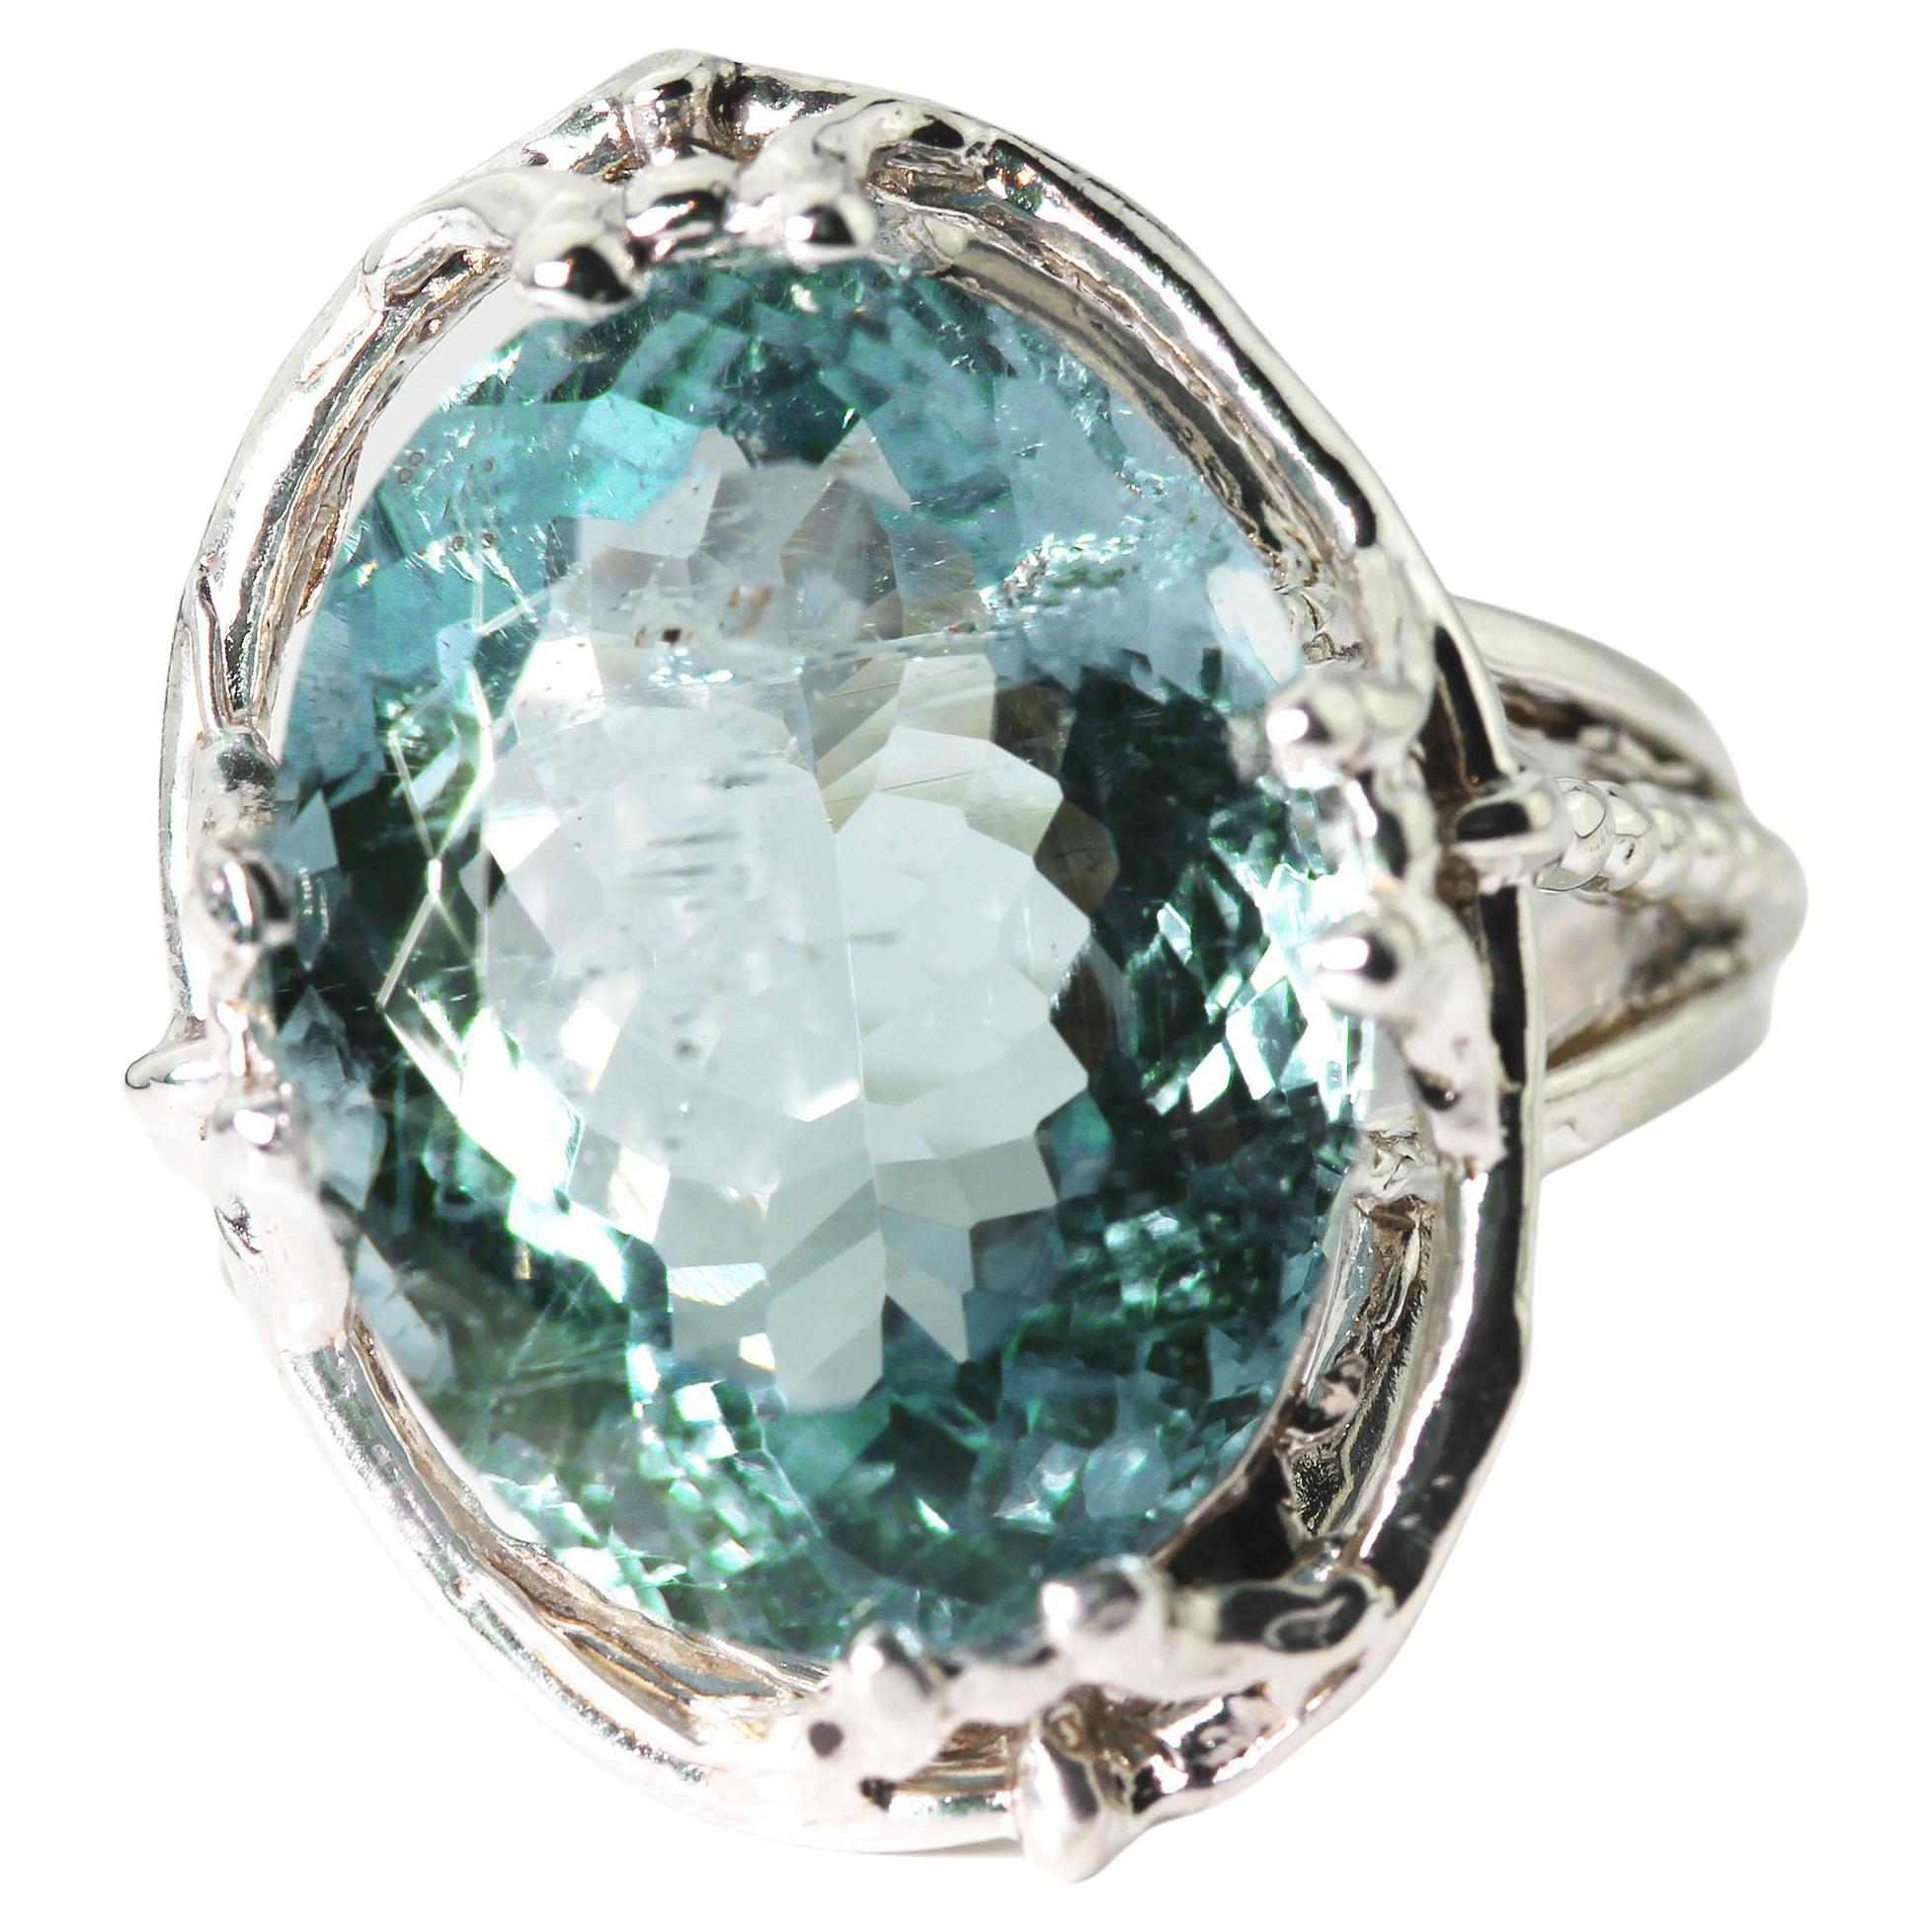 AJD Beautiful Glittering Real 8.18Cts BlueGreen Aquamarine Silver Ring For Sale